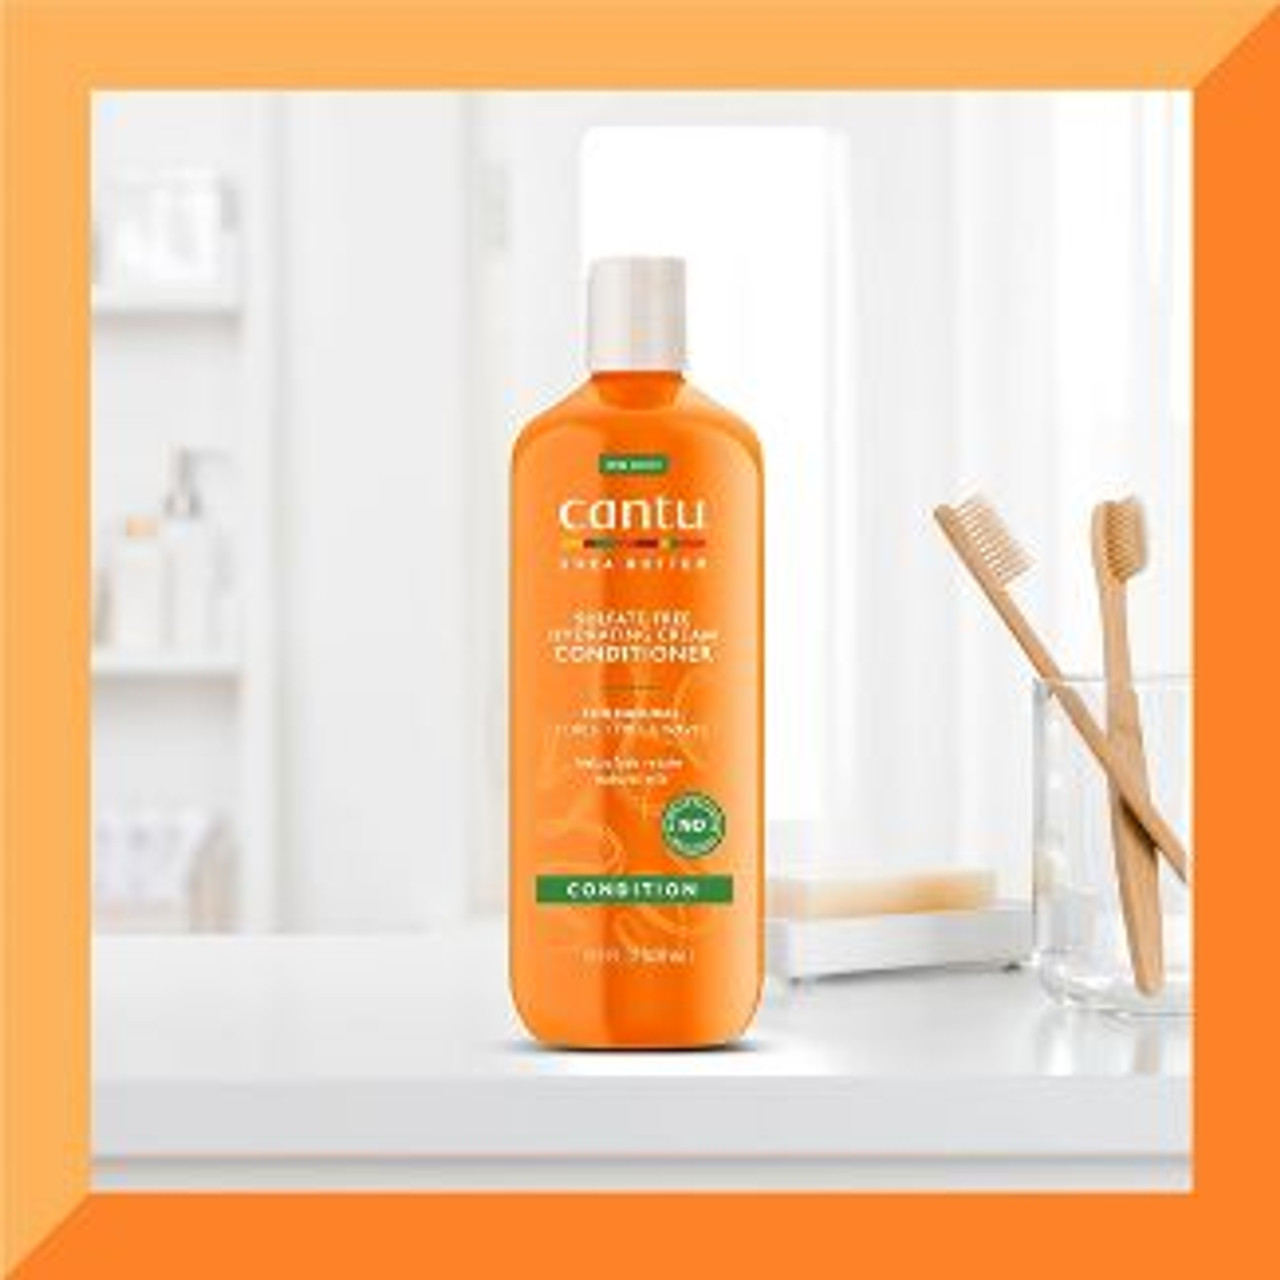 Cantu Care for Kids Nourishing Conditioner (8 oz.) - NaturallyCurly